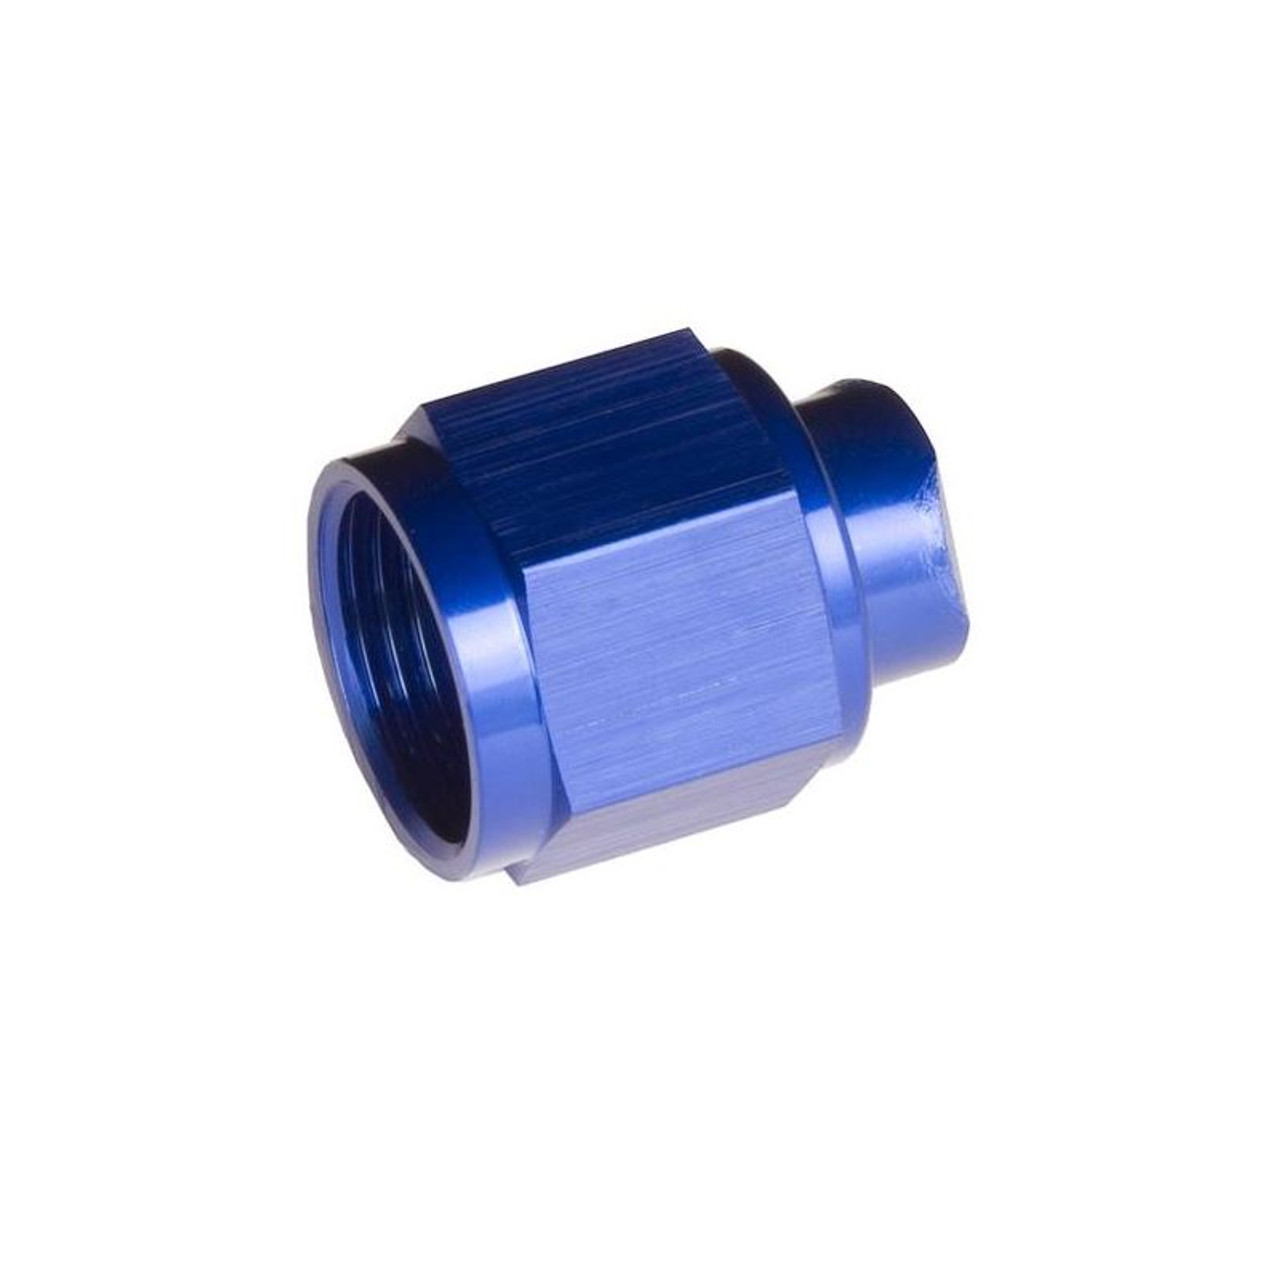 RHP929-06-1, Flare Cap  -06 two piece AN/JIC flare cap nut - blue